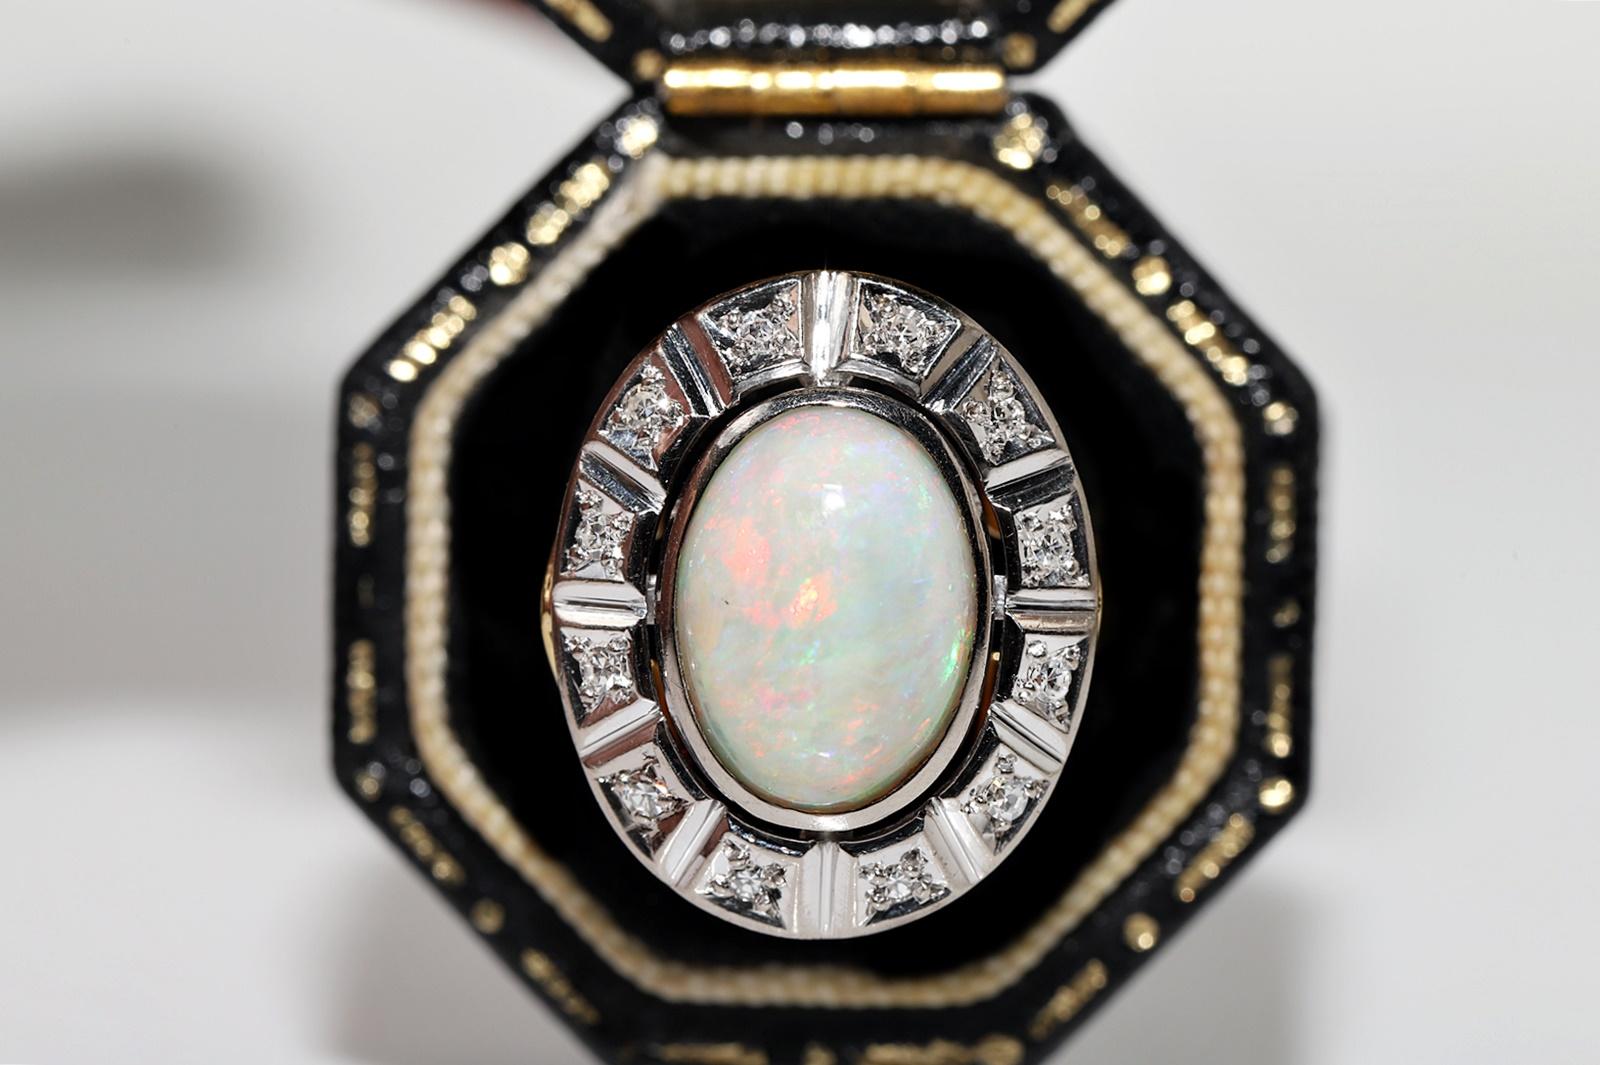 In very good condition.
Total weight is 5.7 grams.
Totally is diamond 0.30 ct.
The diamond is has G-H color and vvs-vs clarity.
Totally is opal about 3 ct.
Ring size is US 5.5
We can make any size.
Box is not included.
Please contact for any